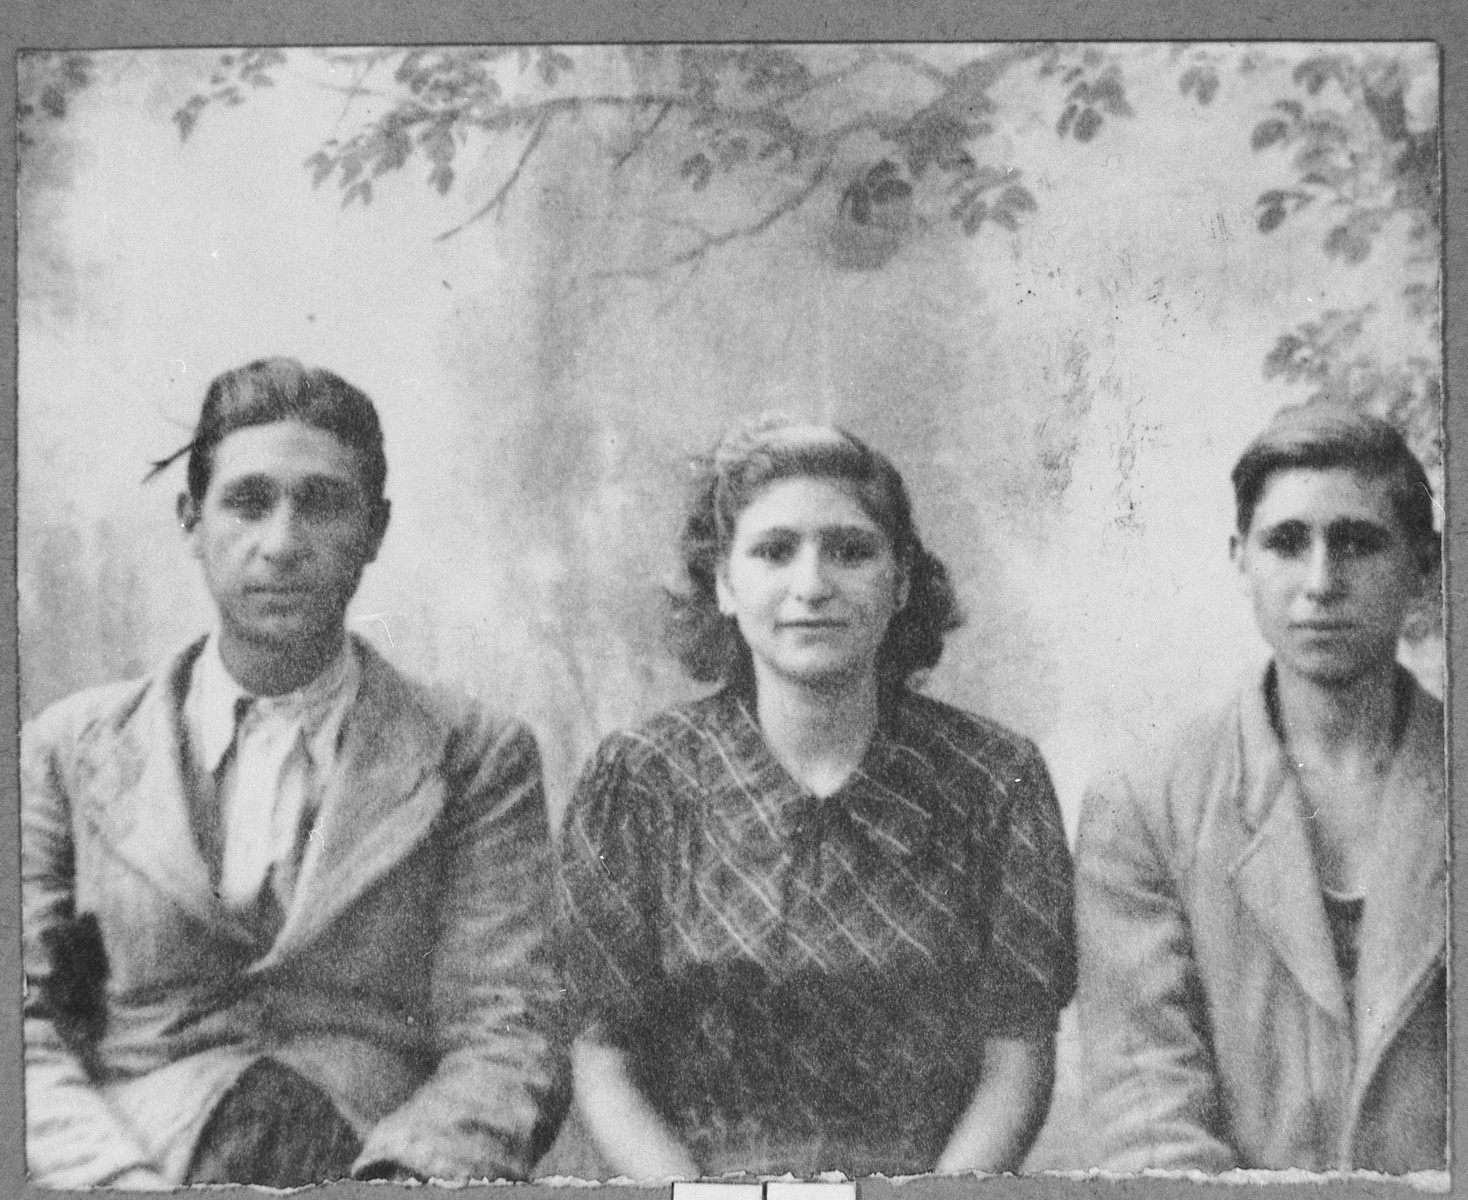 Portrait of Mordechai, Mari and Mois Albocher, the children of Rafael Albocher.  They were students.  They lived at Karagoryeva 49 in Bitola.